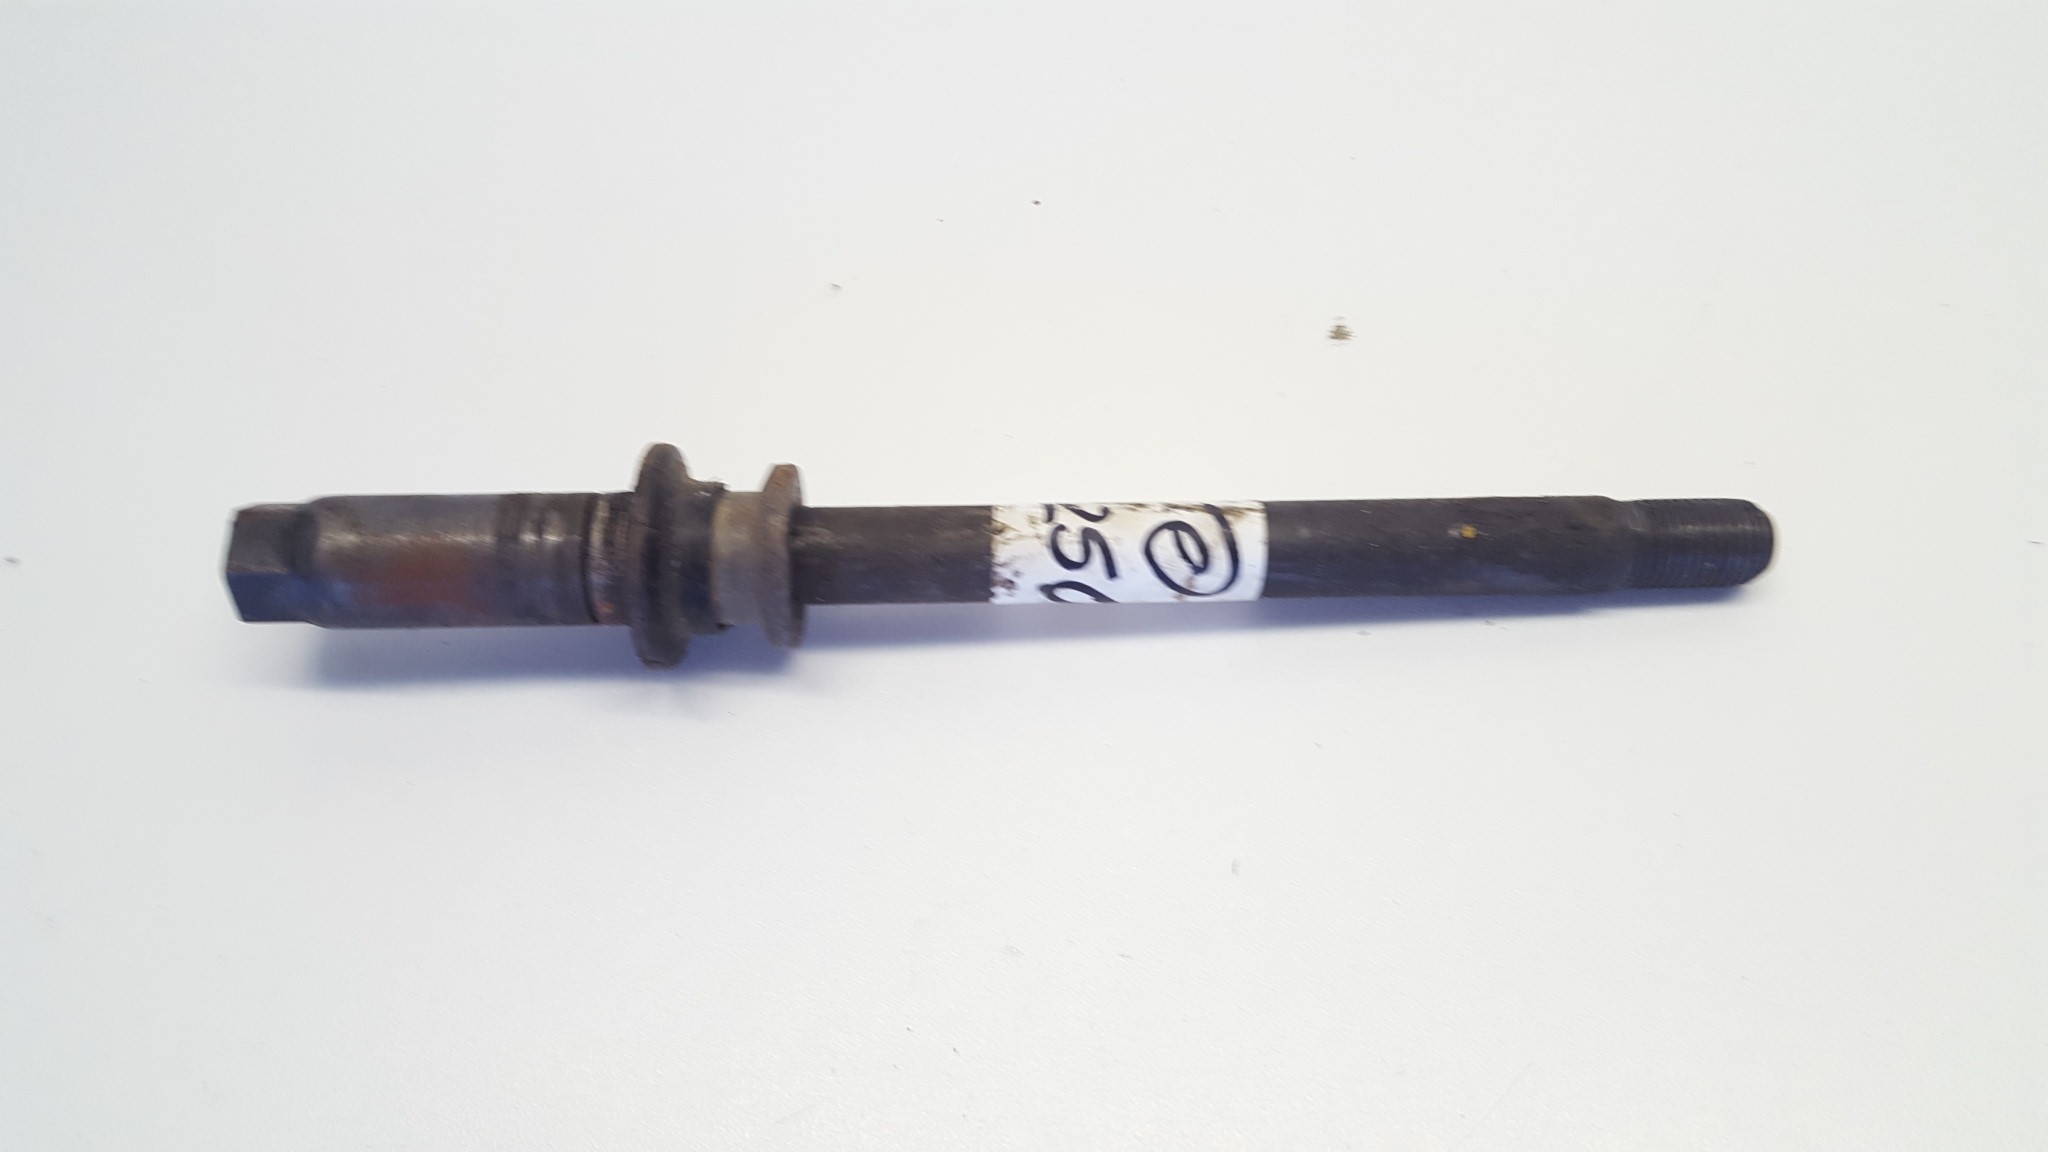 Axle Front Spindle Shaft to suit Yamaha TT250 TT 250 1990 90-97